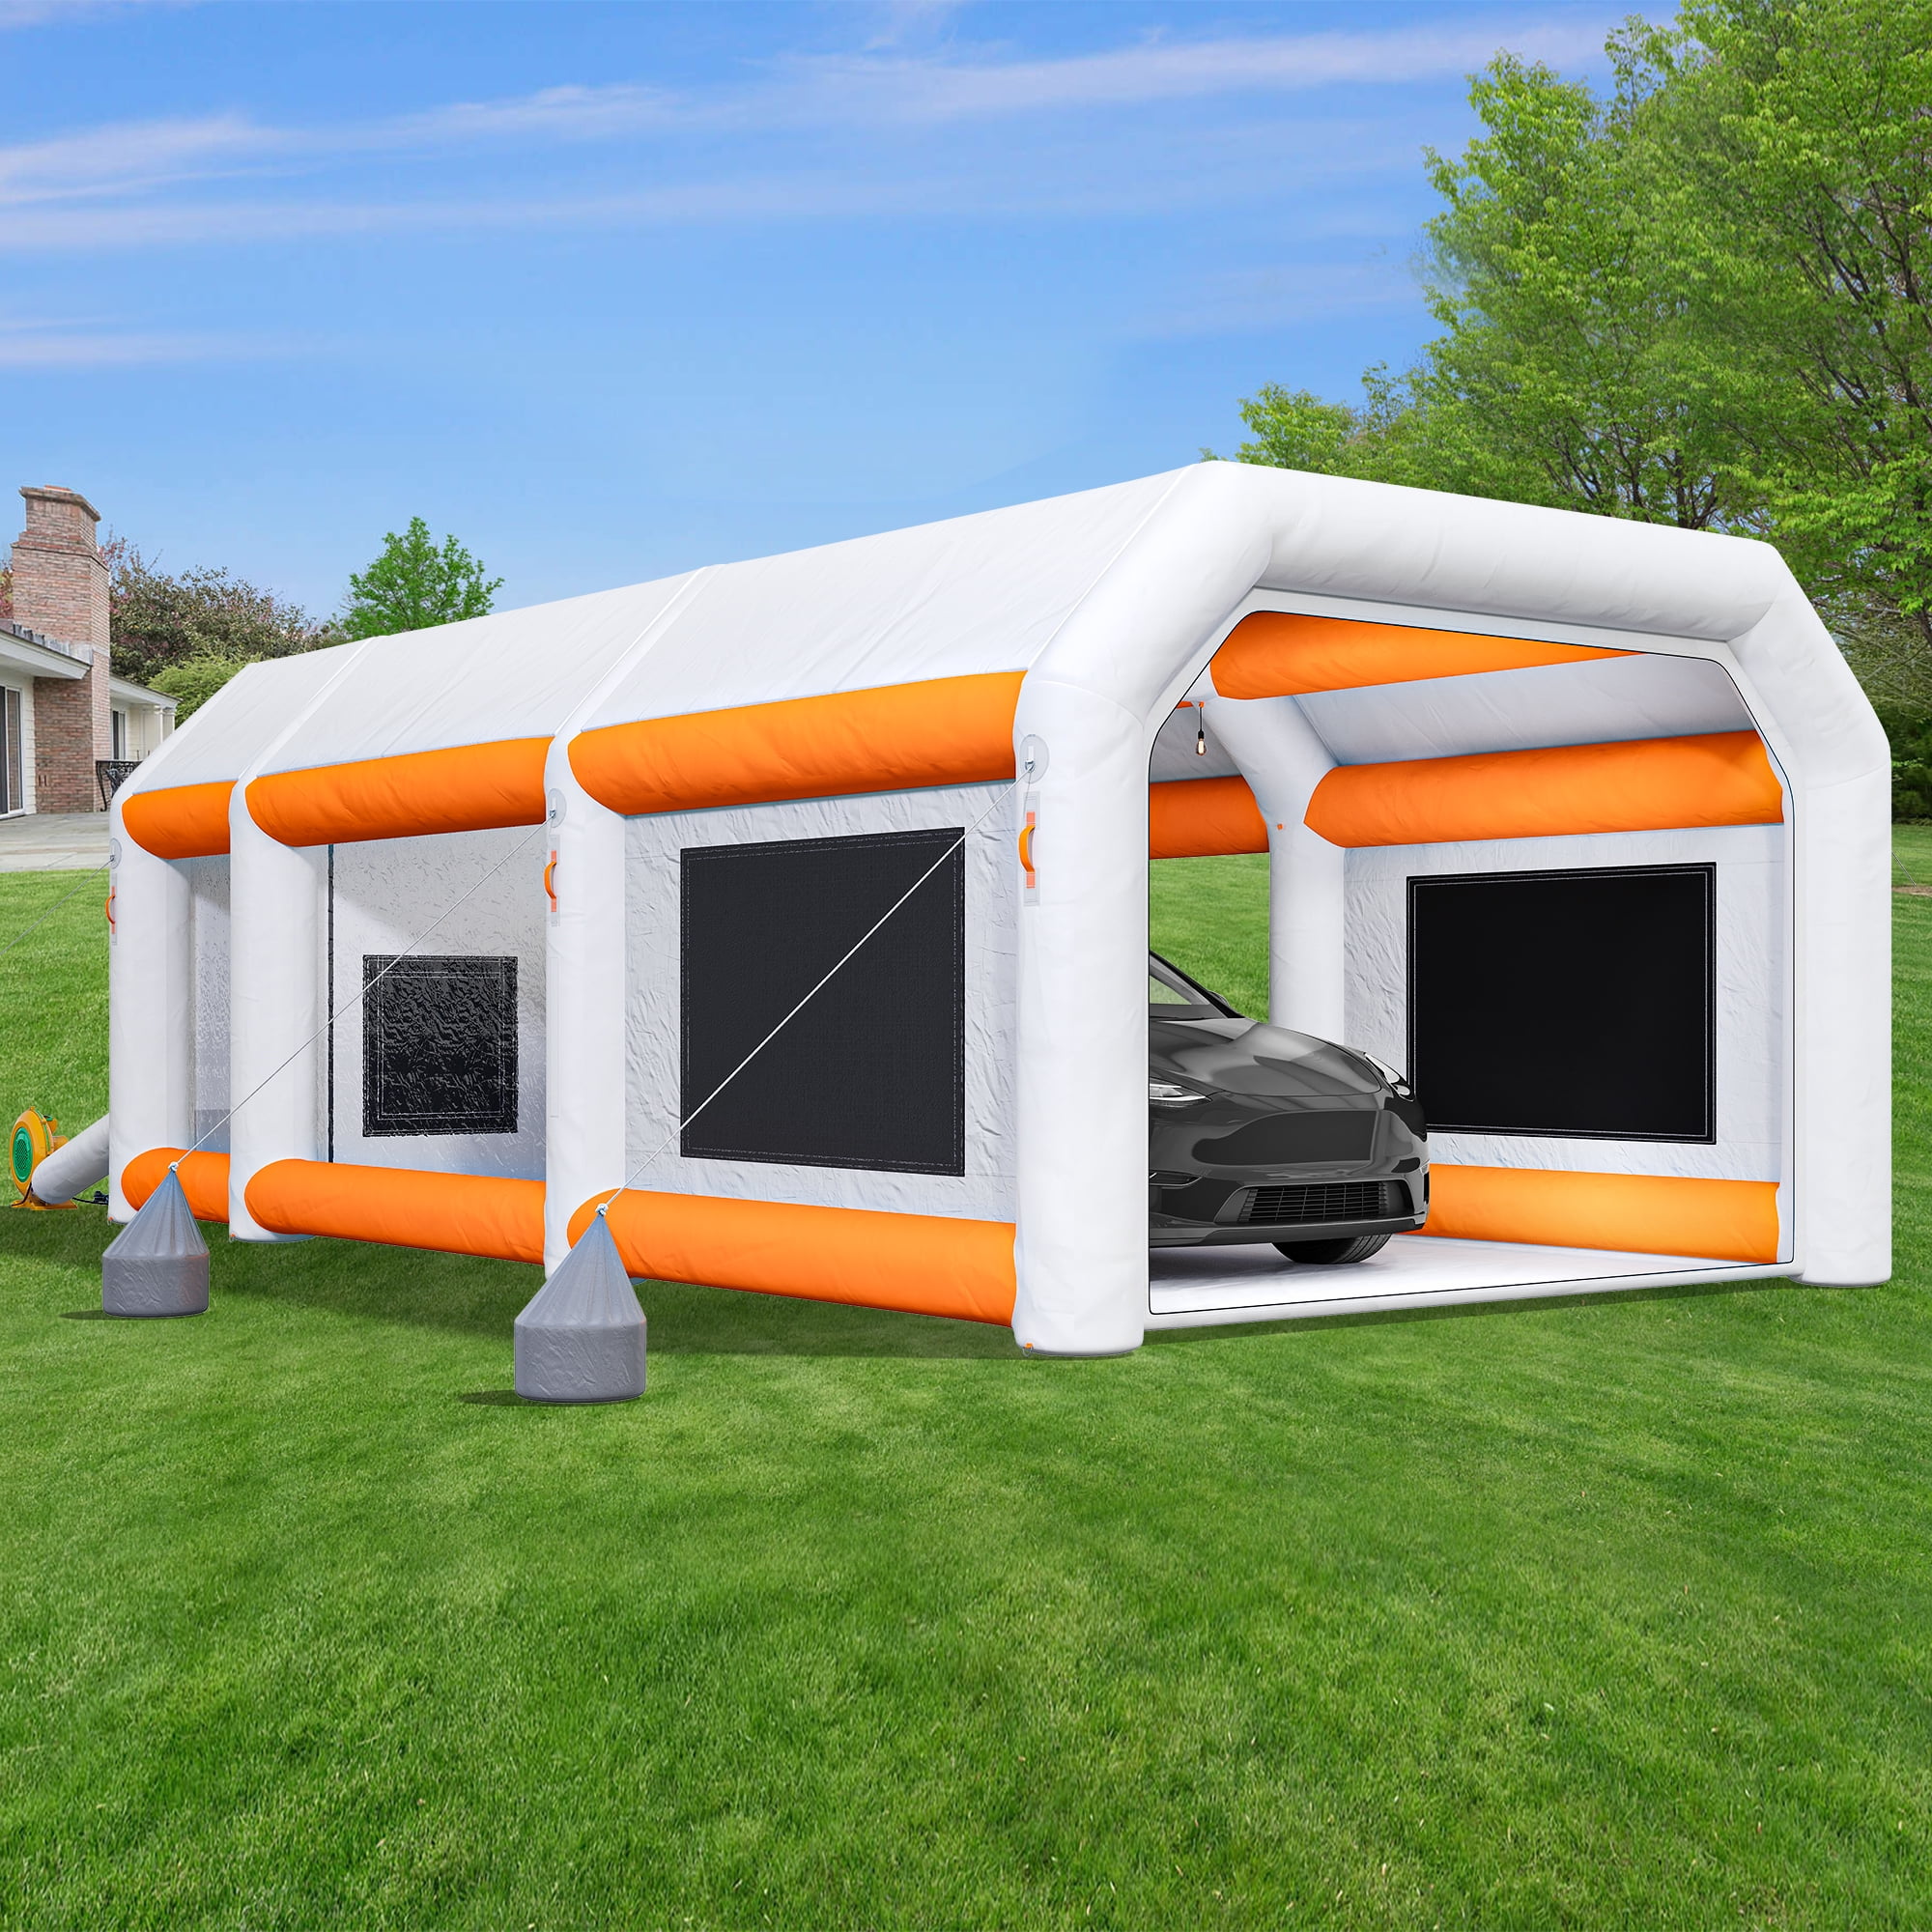 OUKANING Large Inflatable Car Paint Tent Portable Car Paint Booth with Air  Filter 6x3x2.5m 